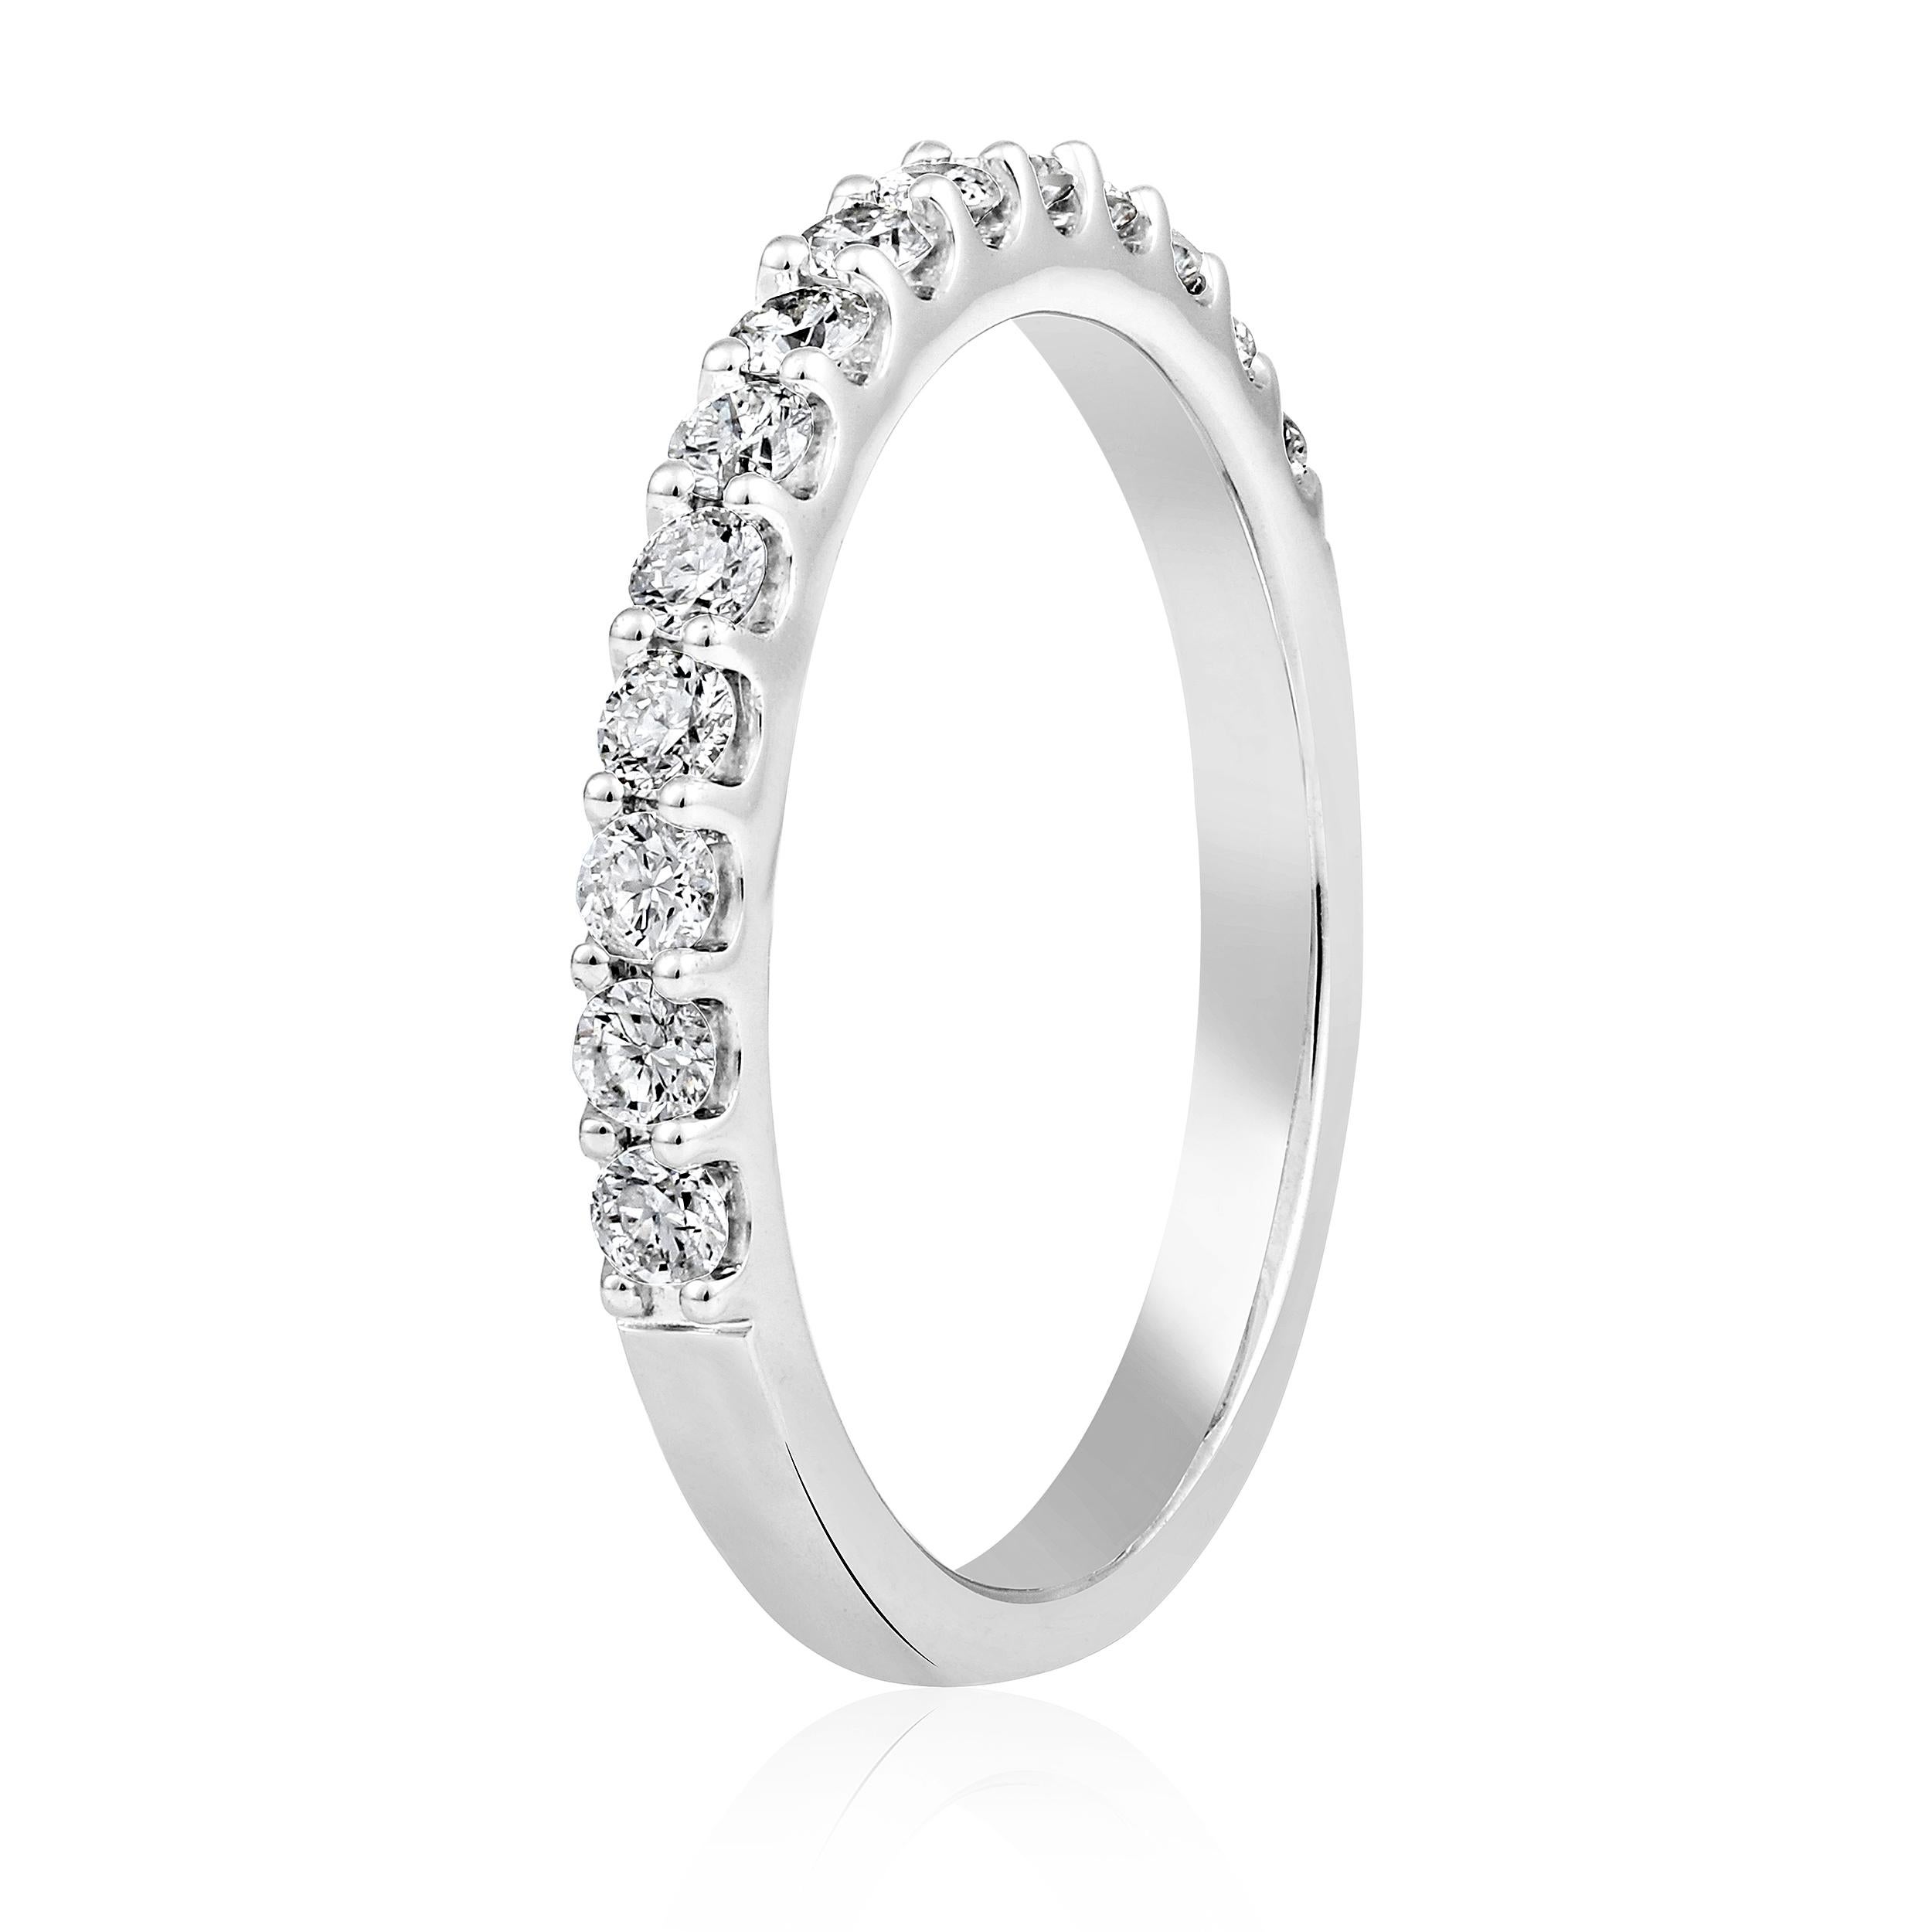 Ring Size: US 7 

Crafted in 2.53 grams of 14K White Gold, the ring contains 14 stones of Round Diamonds with a total of 0.48 carat in F-G color and I1-I2 clarity.
This jewelry piece will be expertly crafted by our skilled artisans upon order. Allow